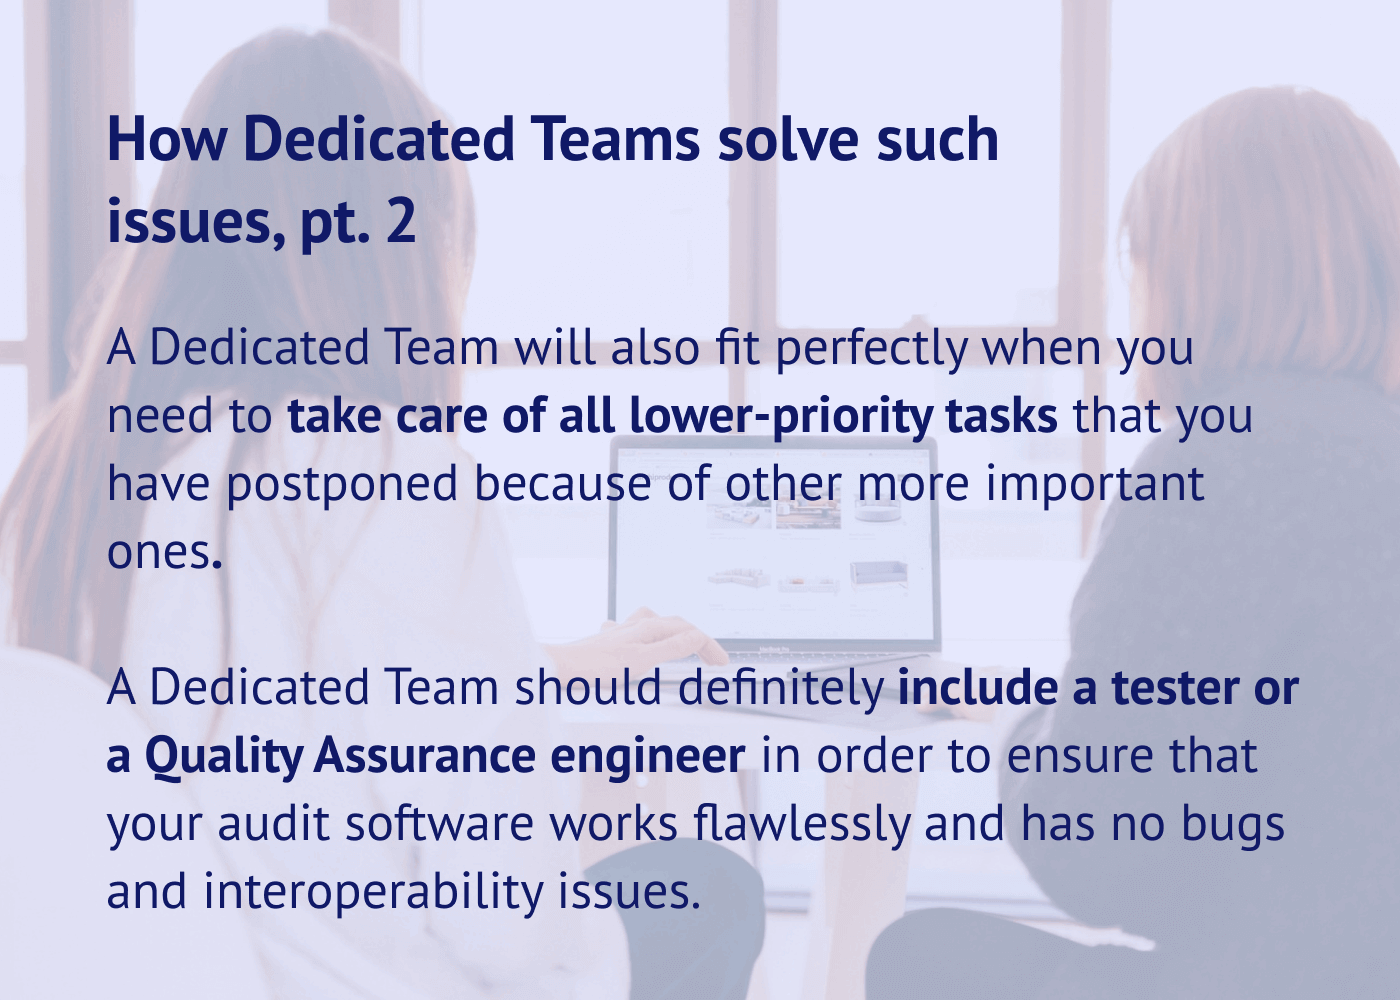 How Dedicated Teams solve these issues, part 2.